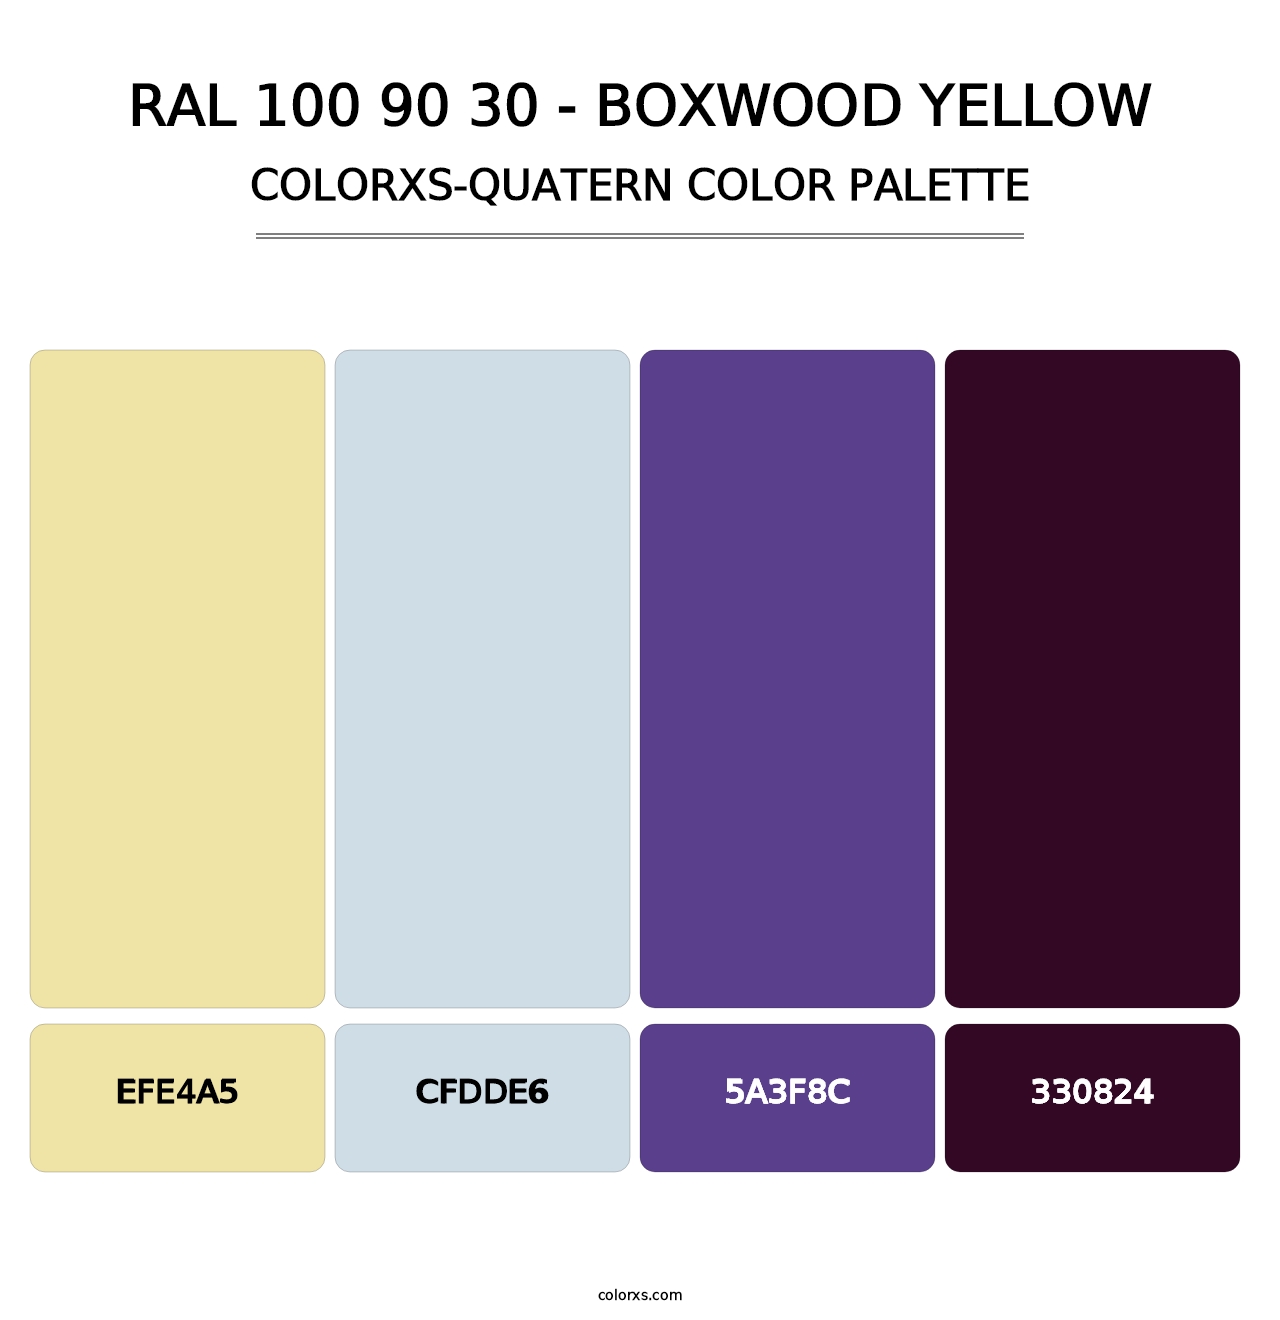 RAL 100 90 30 - Boxwood Yellow - Colorxs Quatern Palette